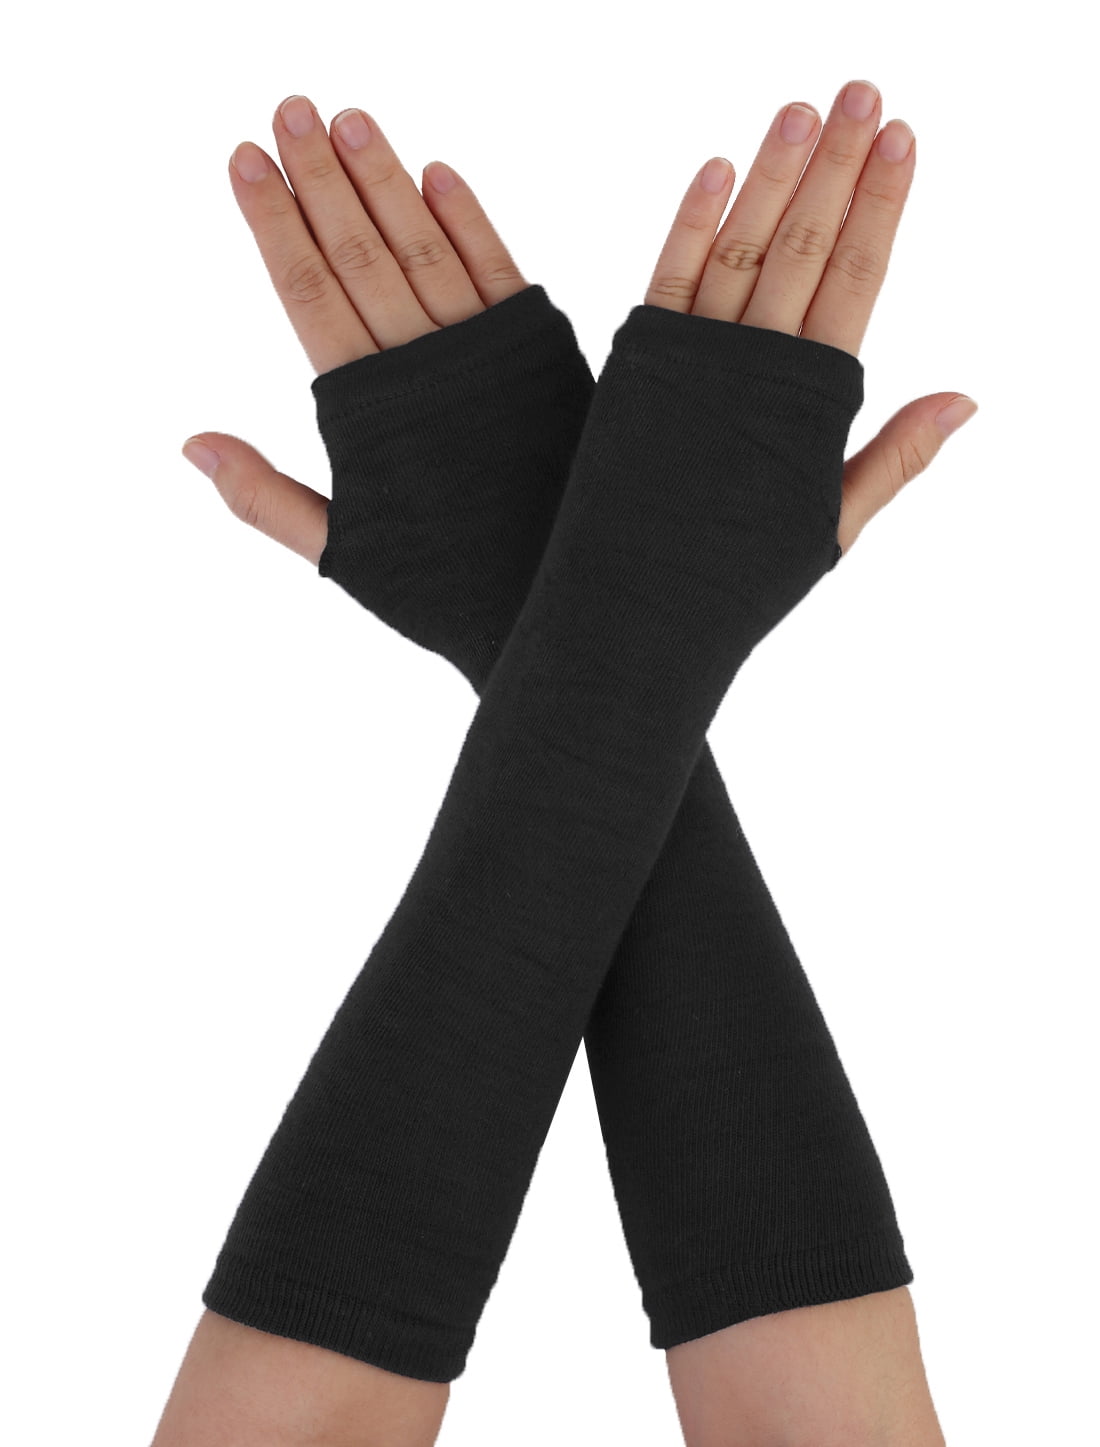 Soft Stretchy Long Sleeve Fingerless Gloves Cashmere Arm Warmers Sleeves hi